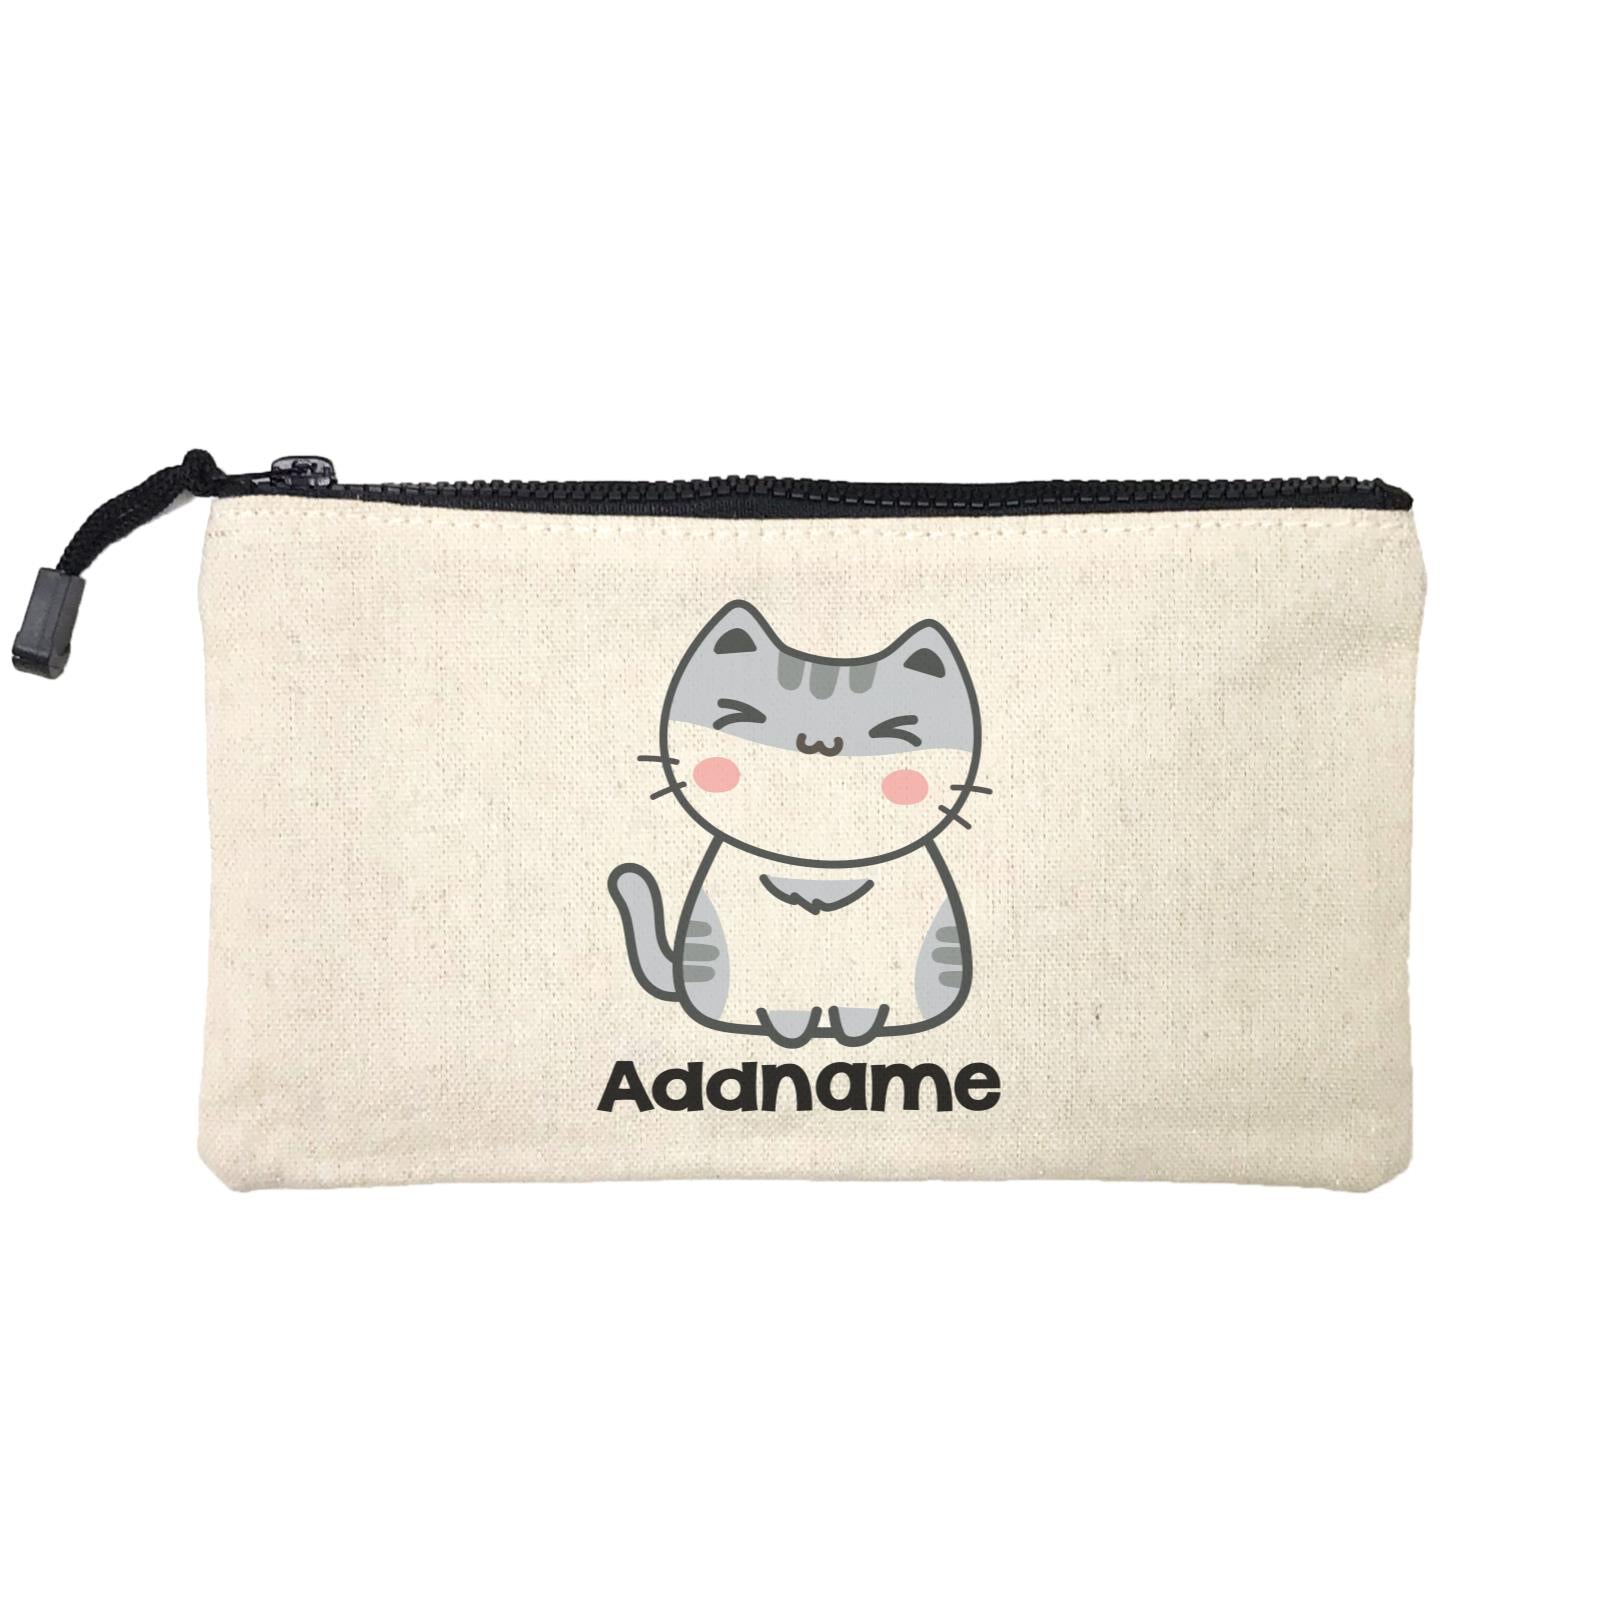 Drawn Adorable Cats White & Grey Addname Mini Accessories Stationery Pouch